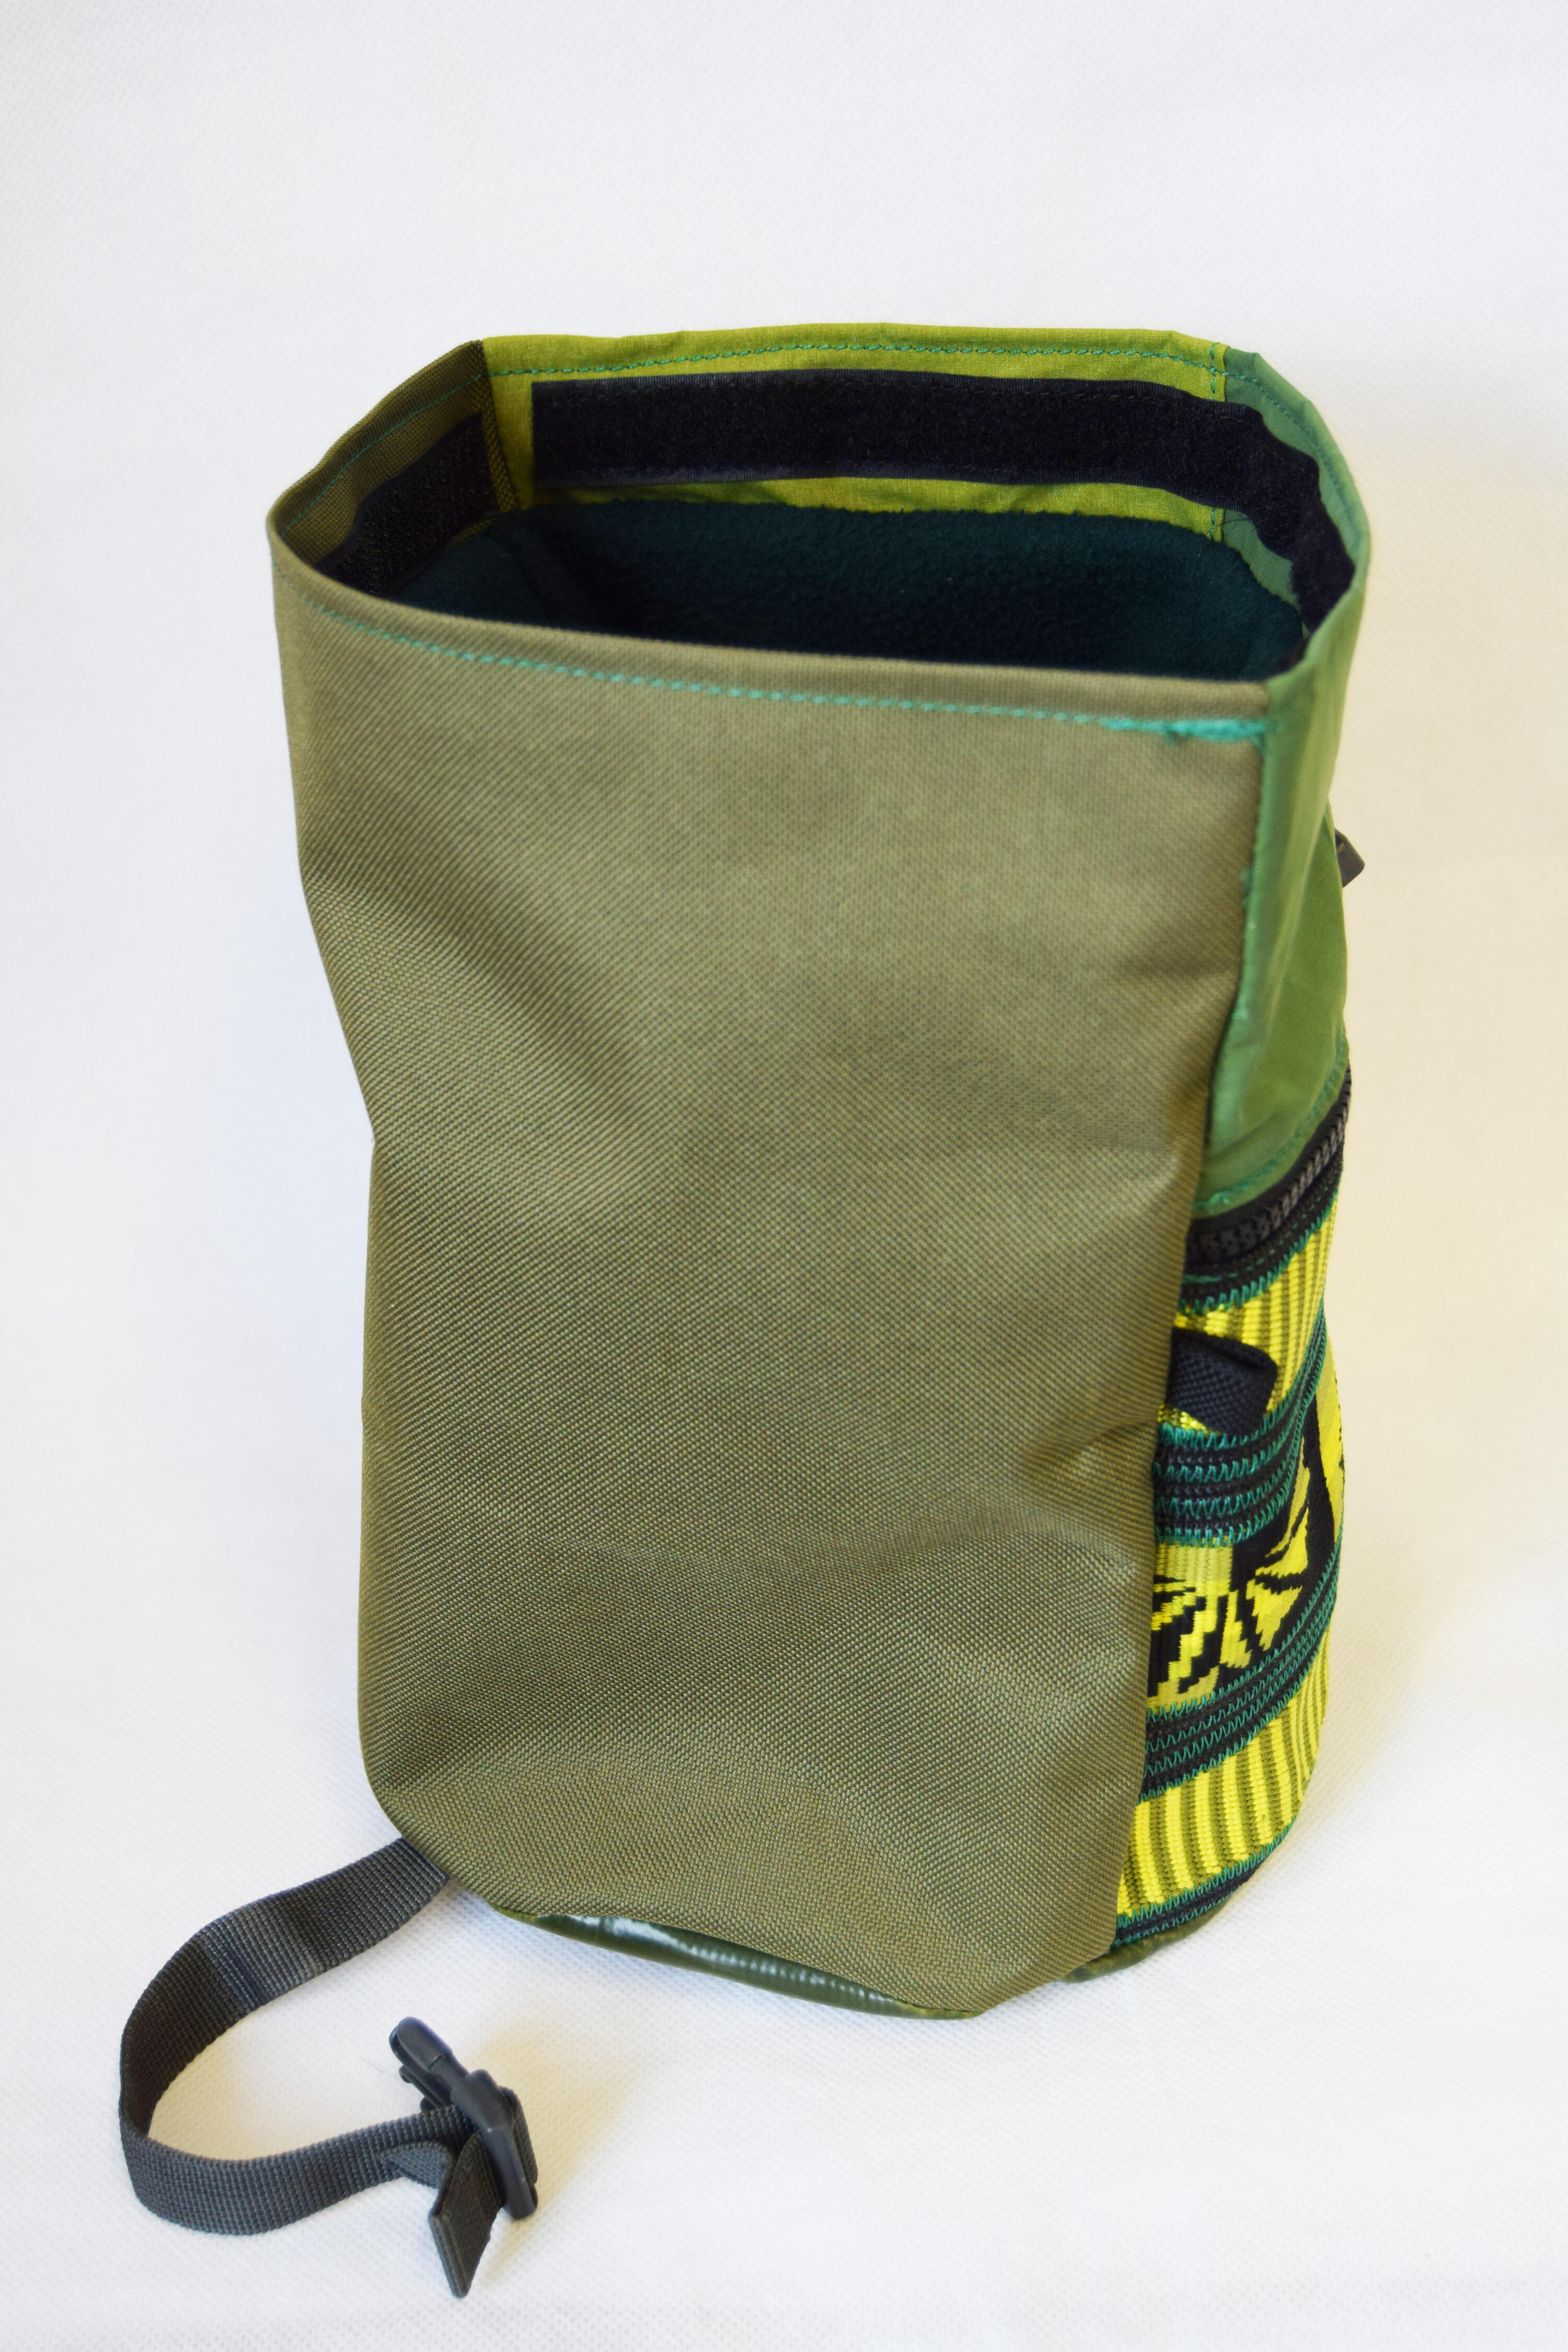 Boulder bag made with recycled rope and upcycled fabric. Green 2/4